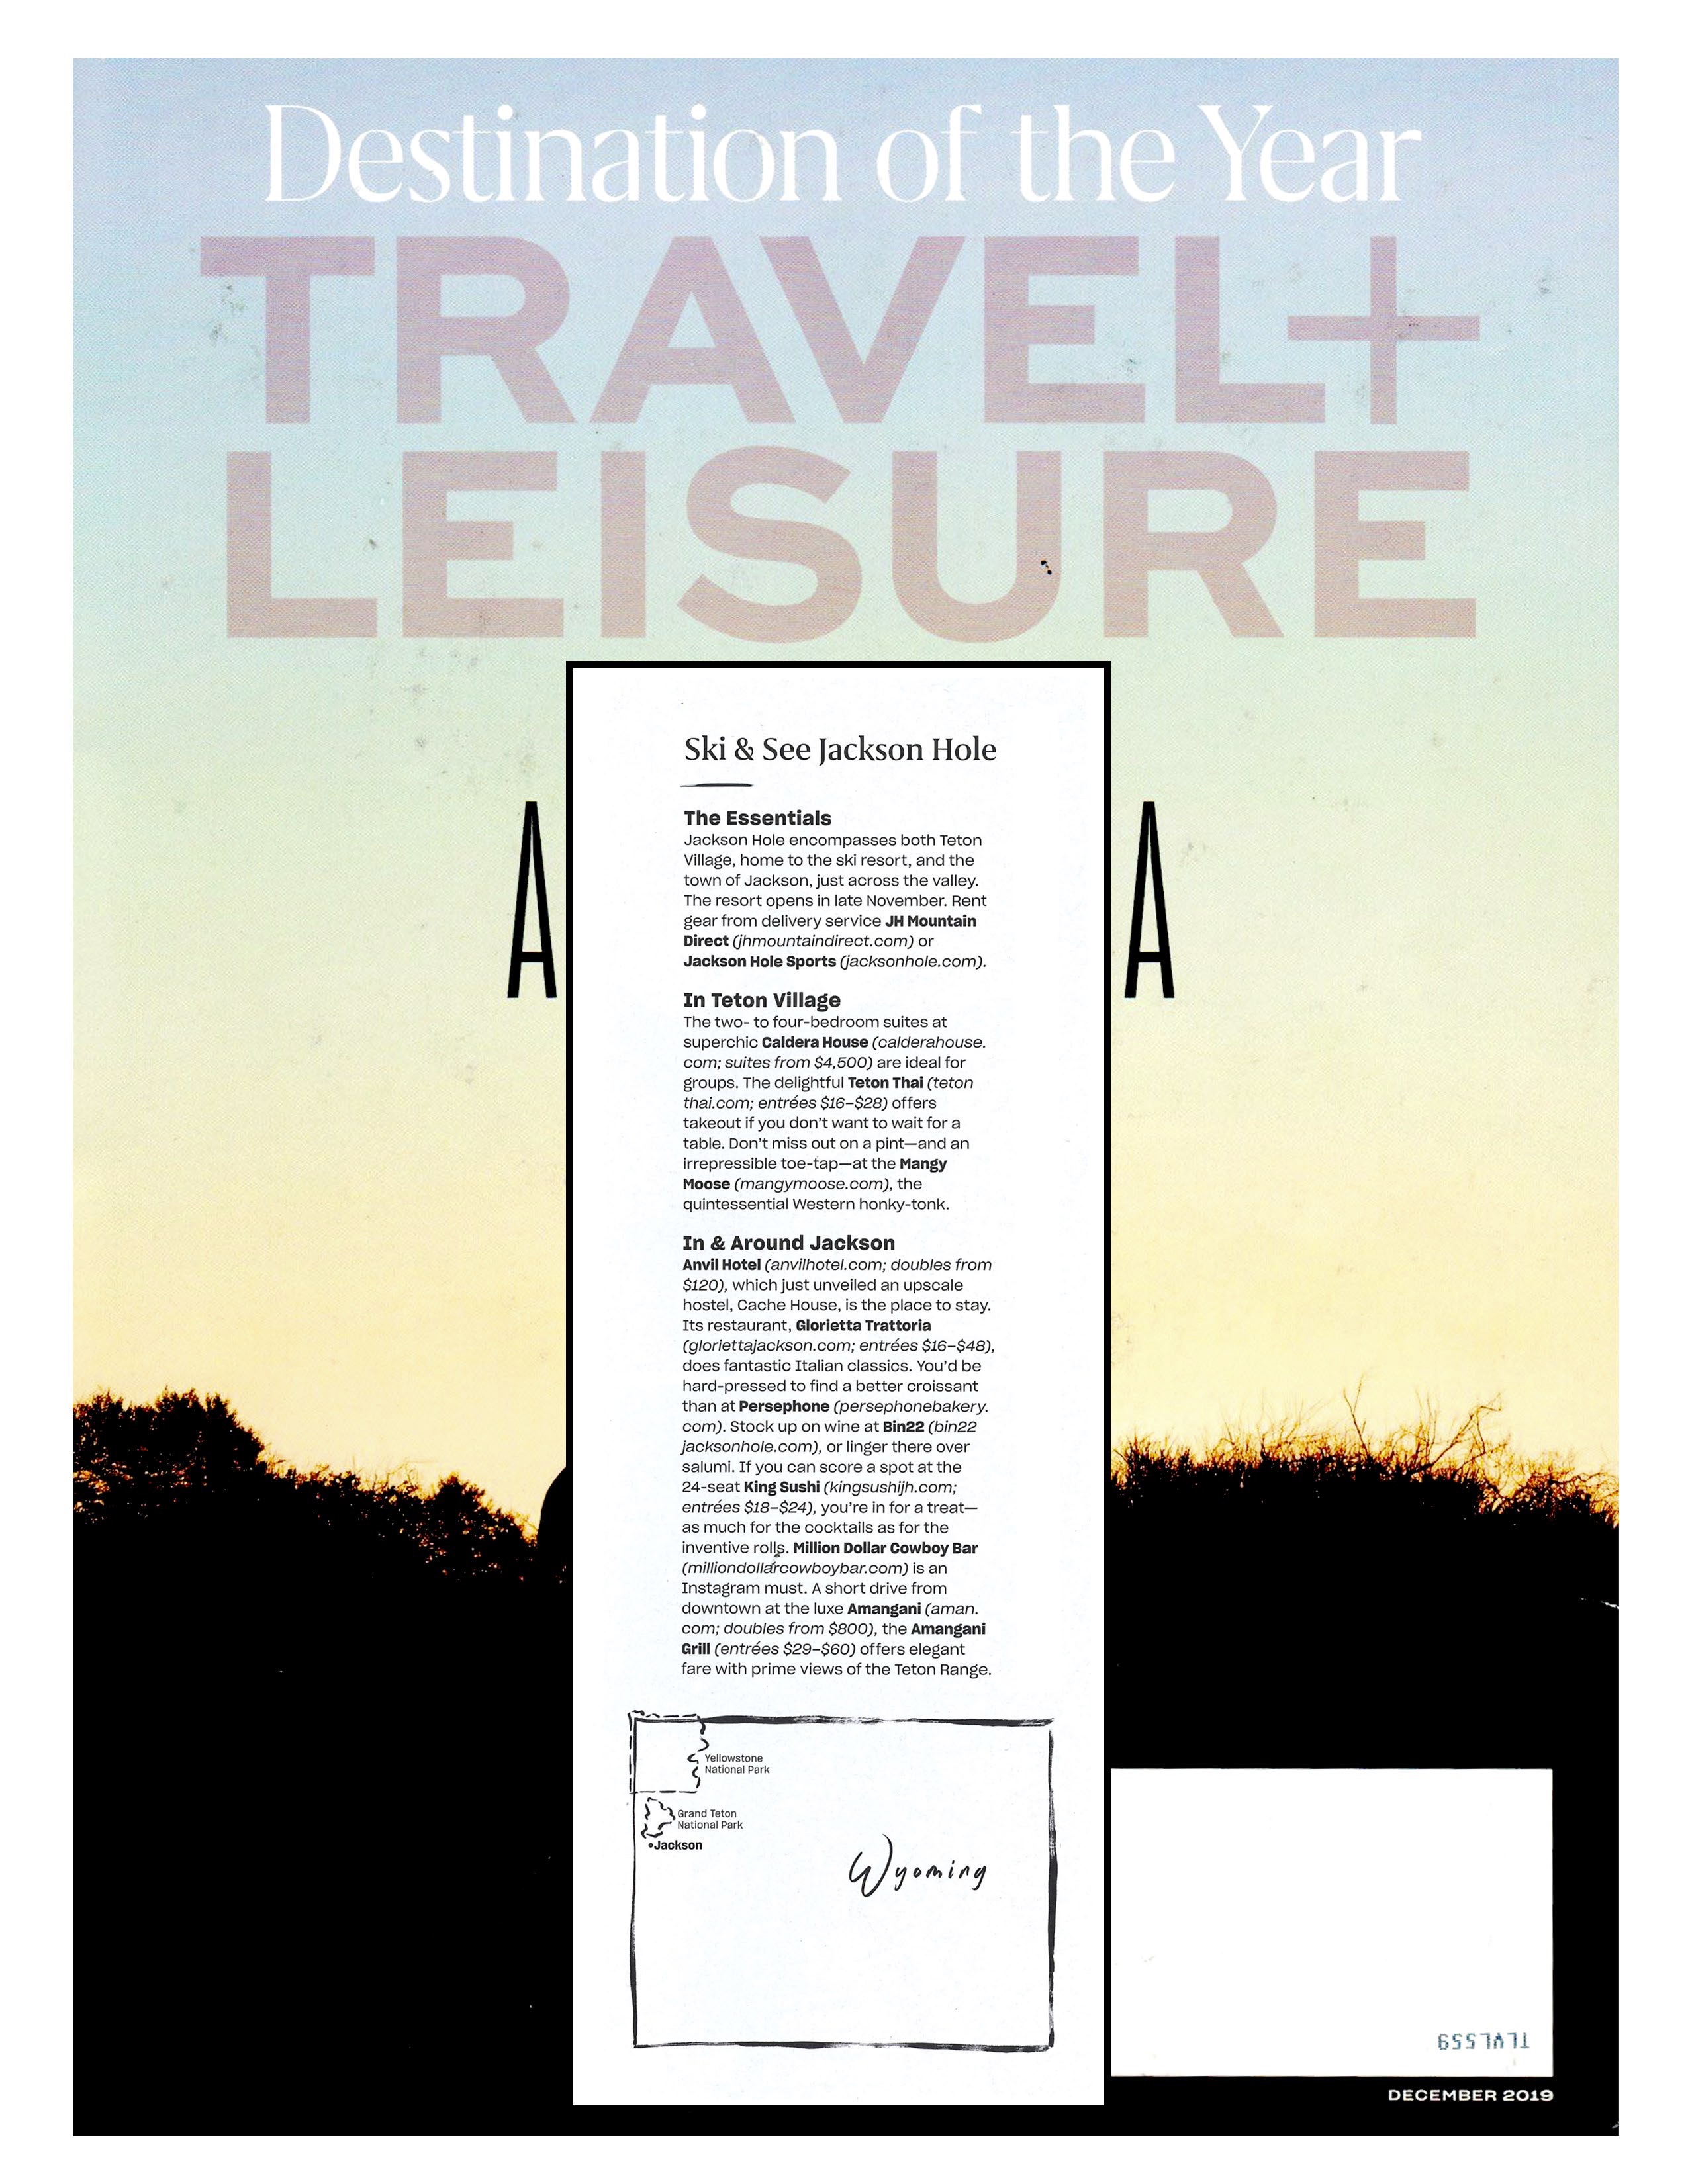 Press item at Bin 22 - Travel and Leisure